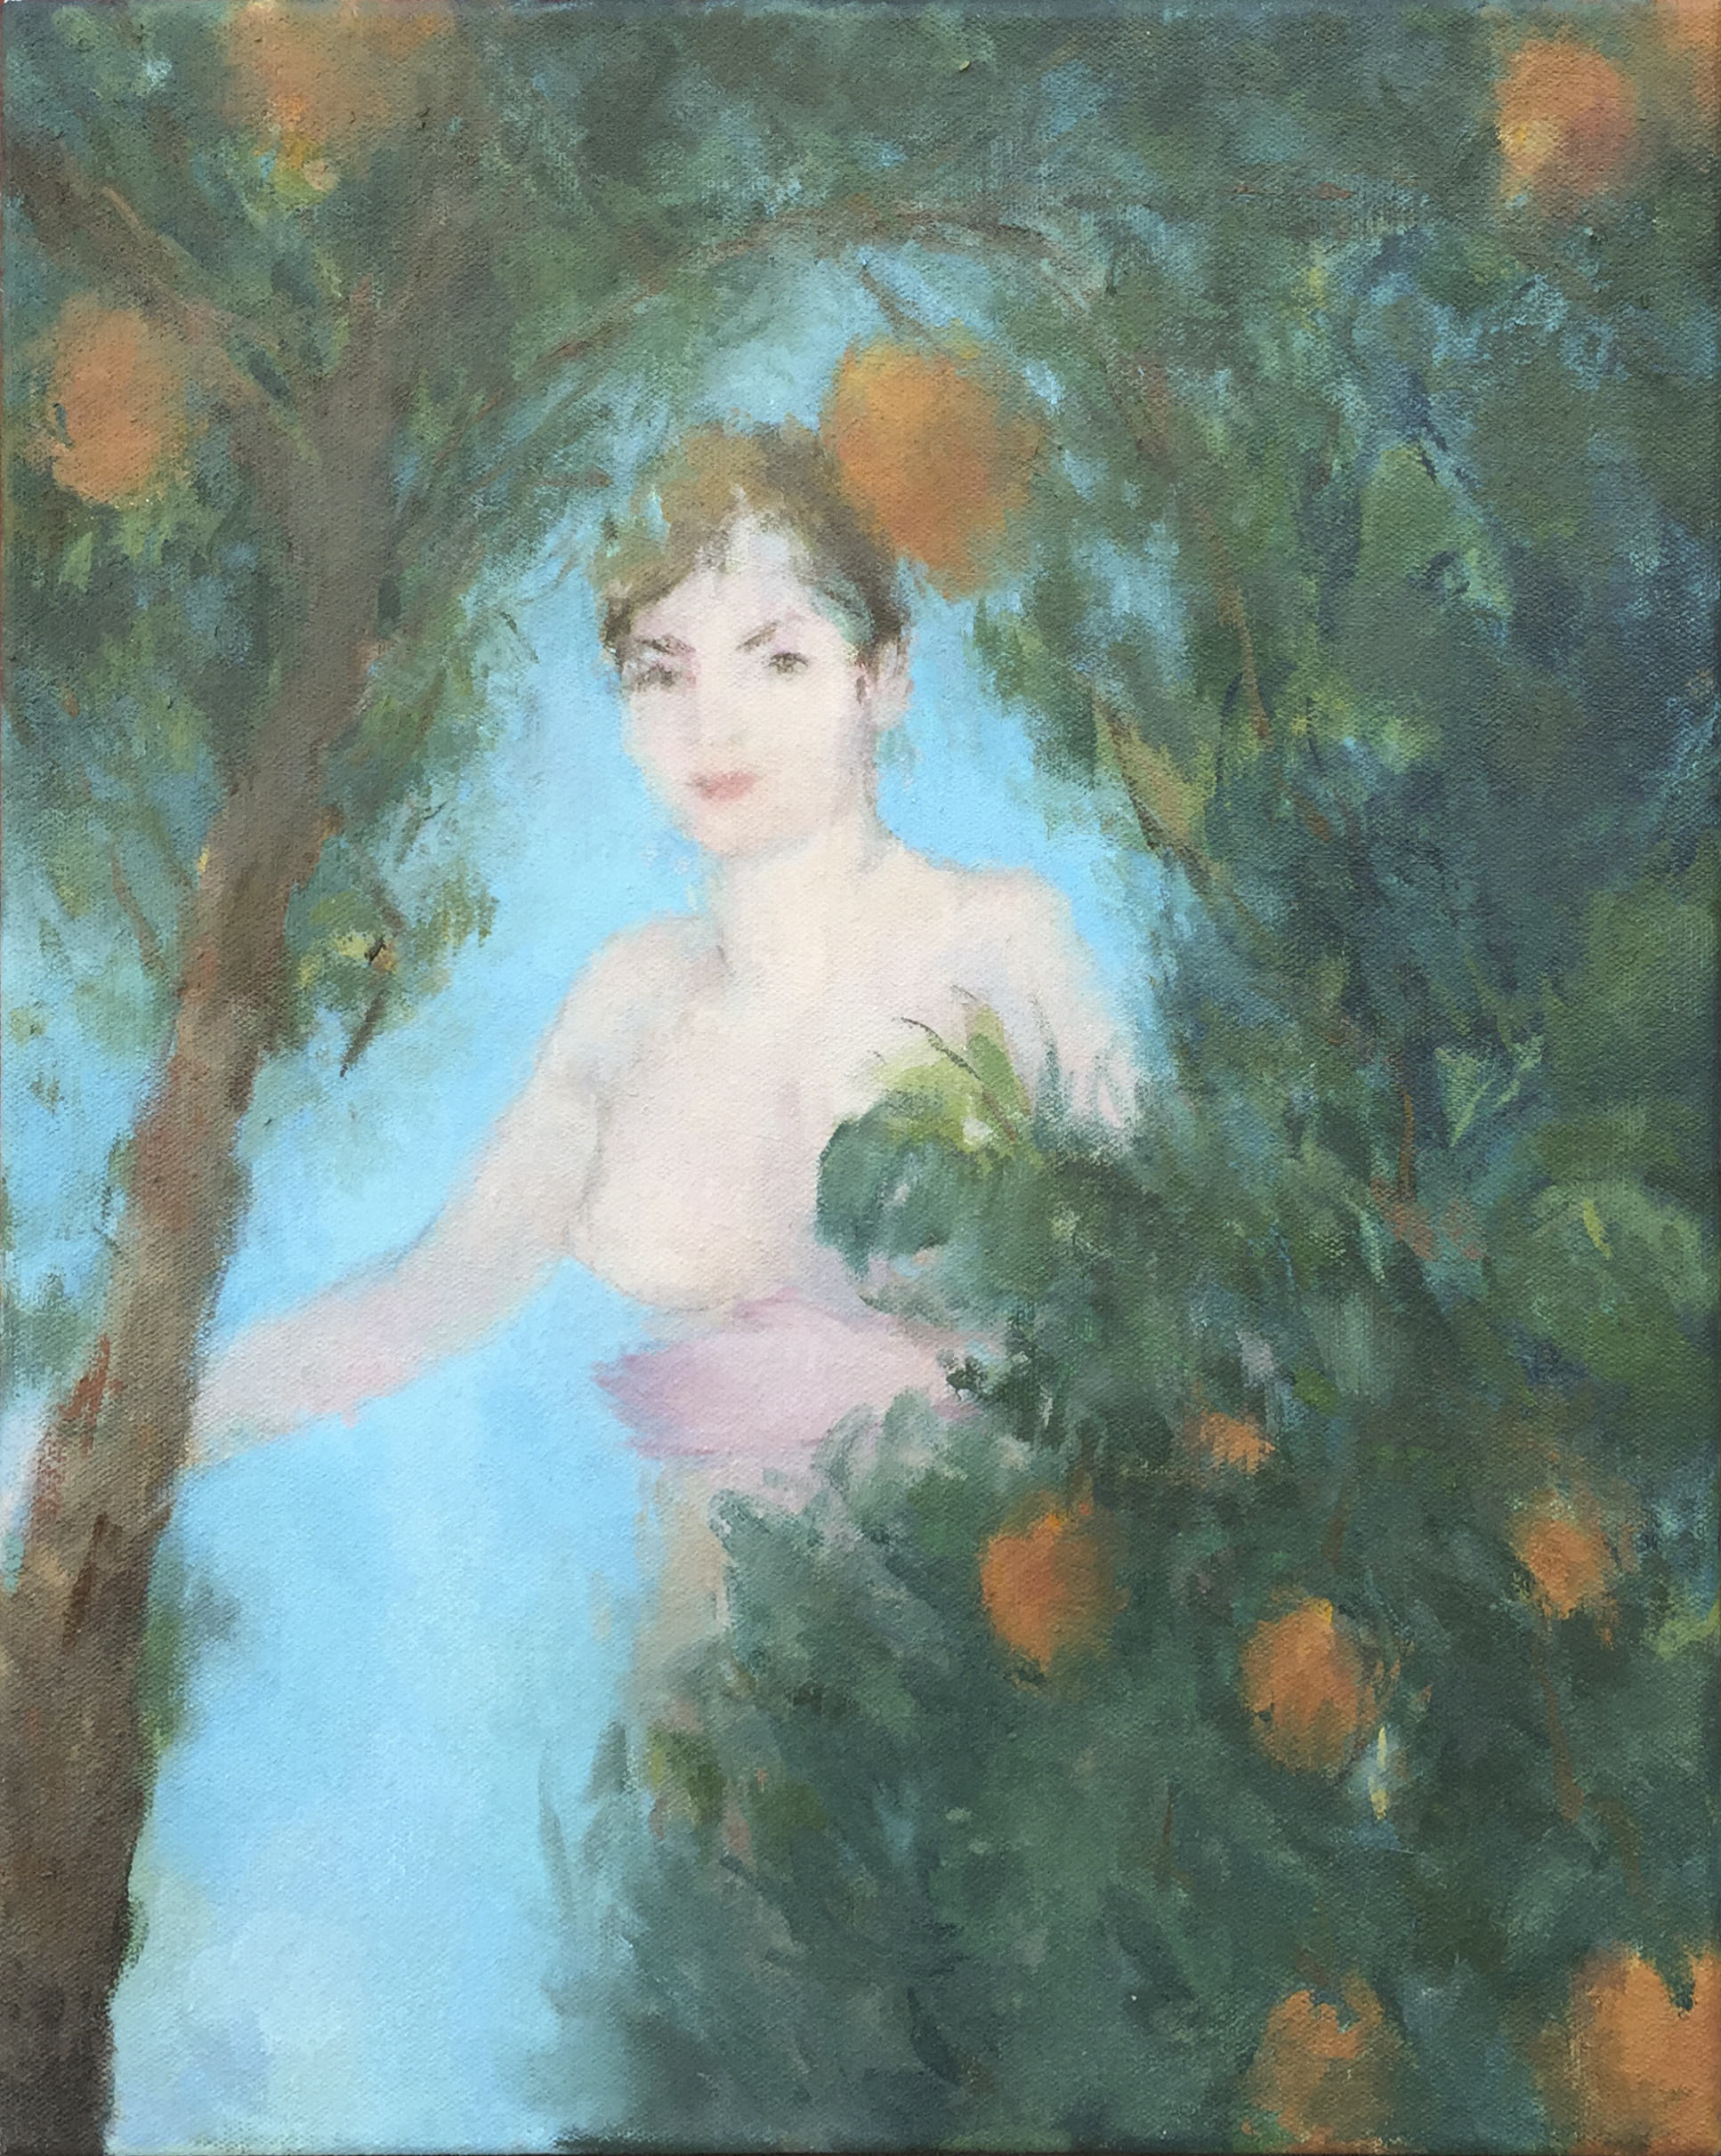    Joan in the Garden     oil on canvas 14x18" 2015  private collection CA 